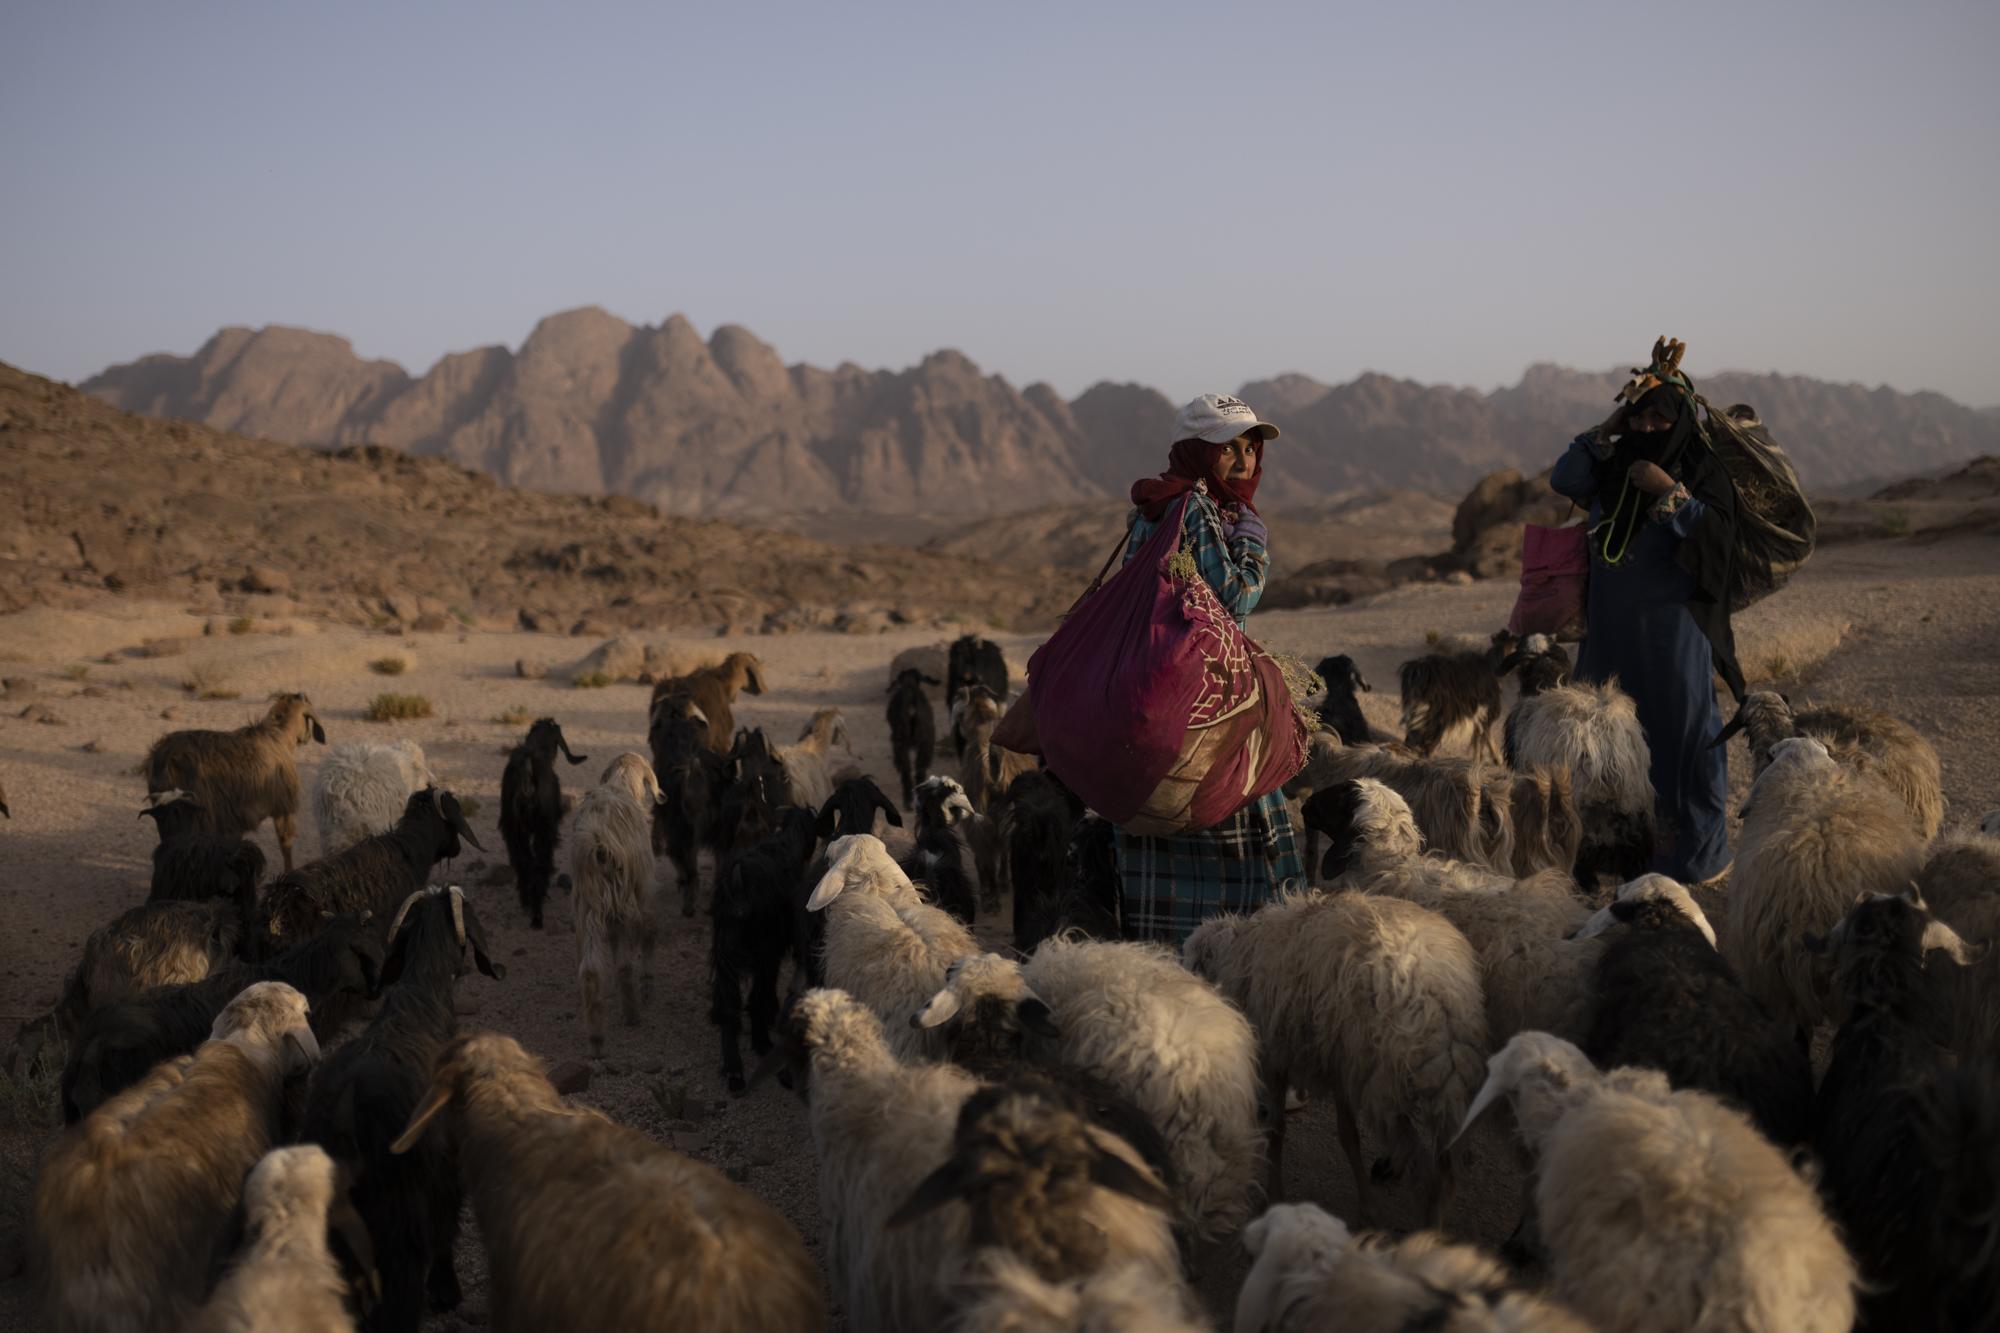 On National Geographic: In one of Egypt's most spiritual places, Bedouins find peace and resilience - Zeinab Ibrahim, 27, makes her way back to the village of Al Tarfa before sunset with three other...